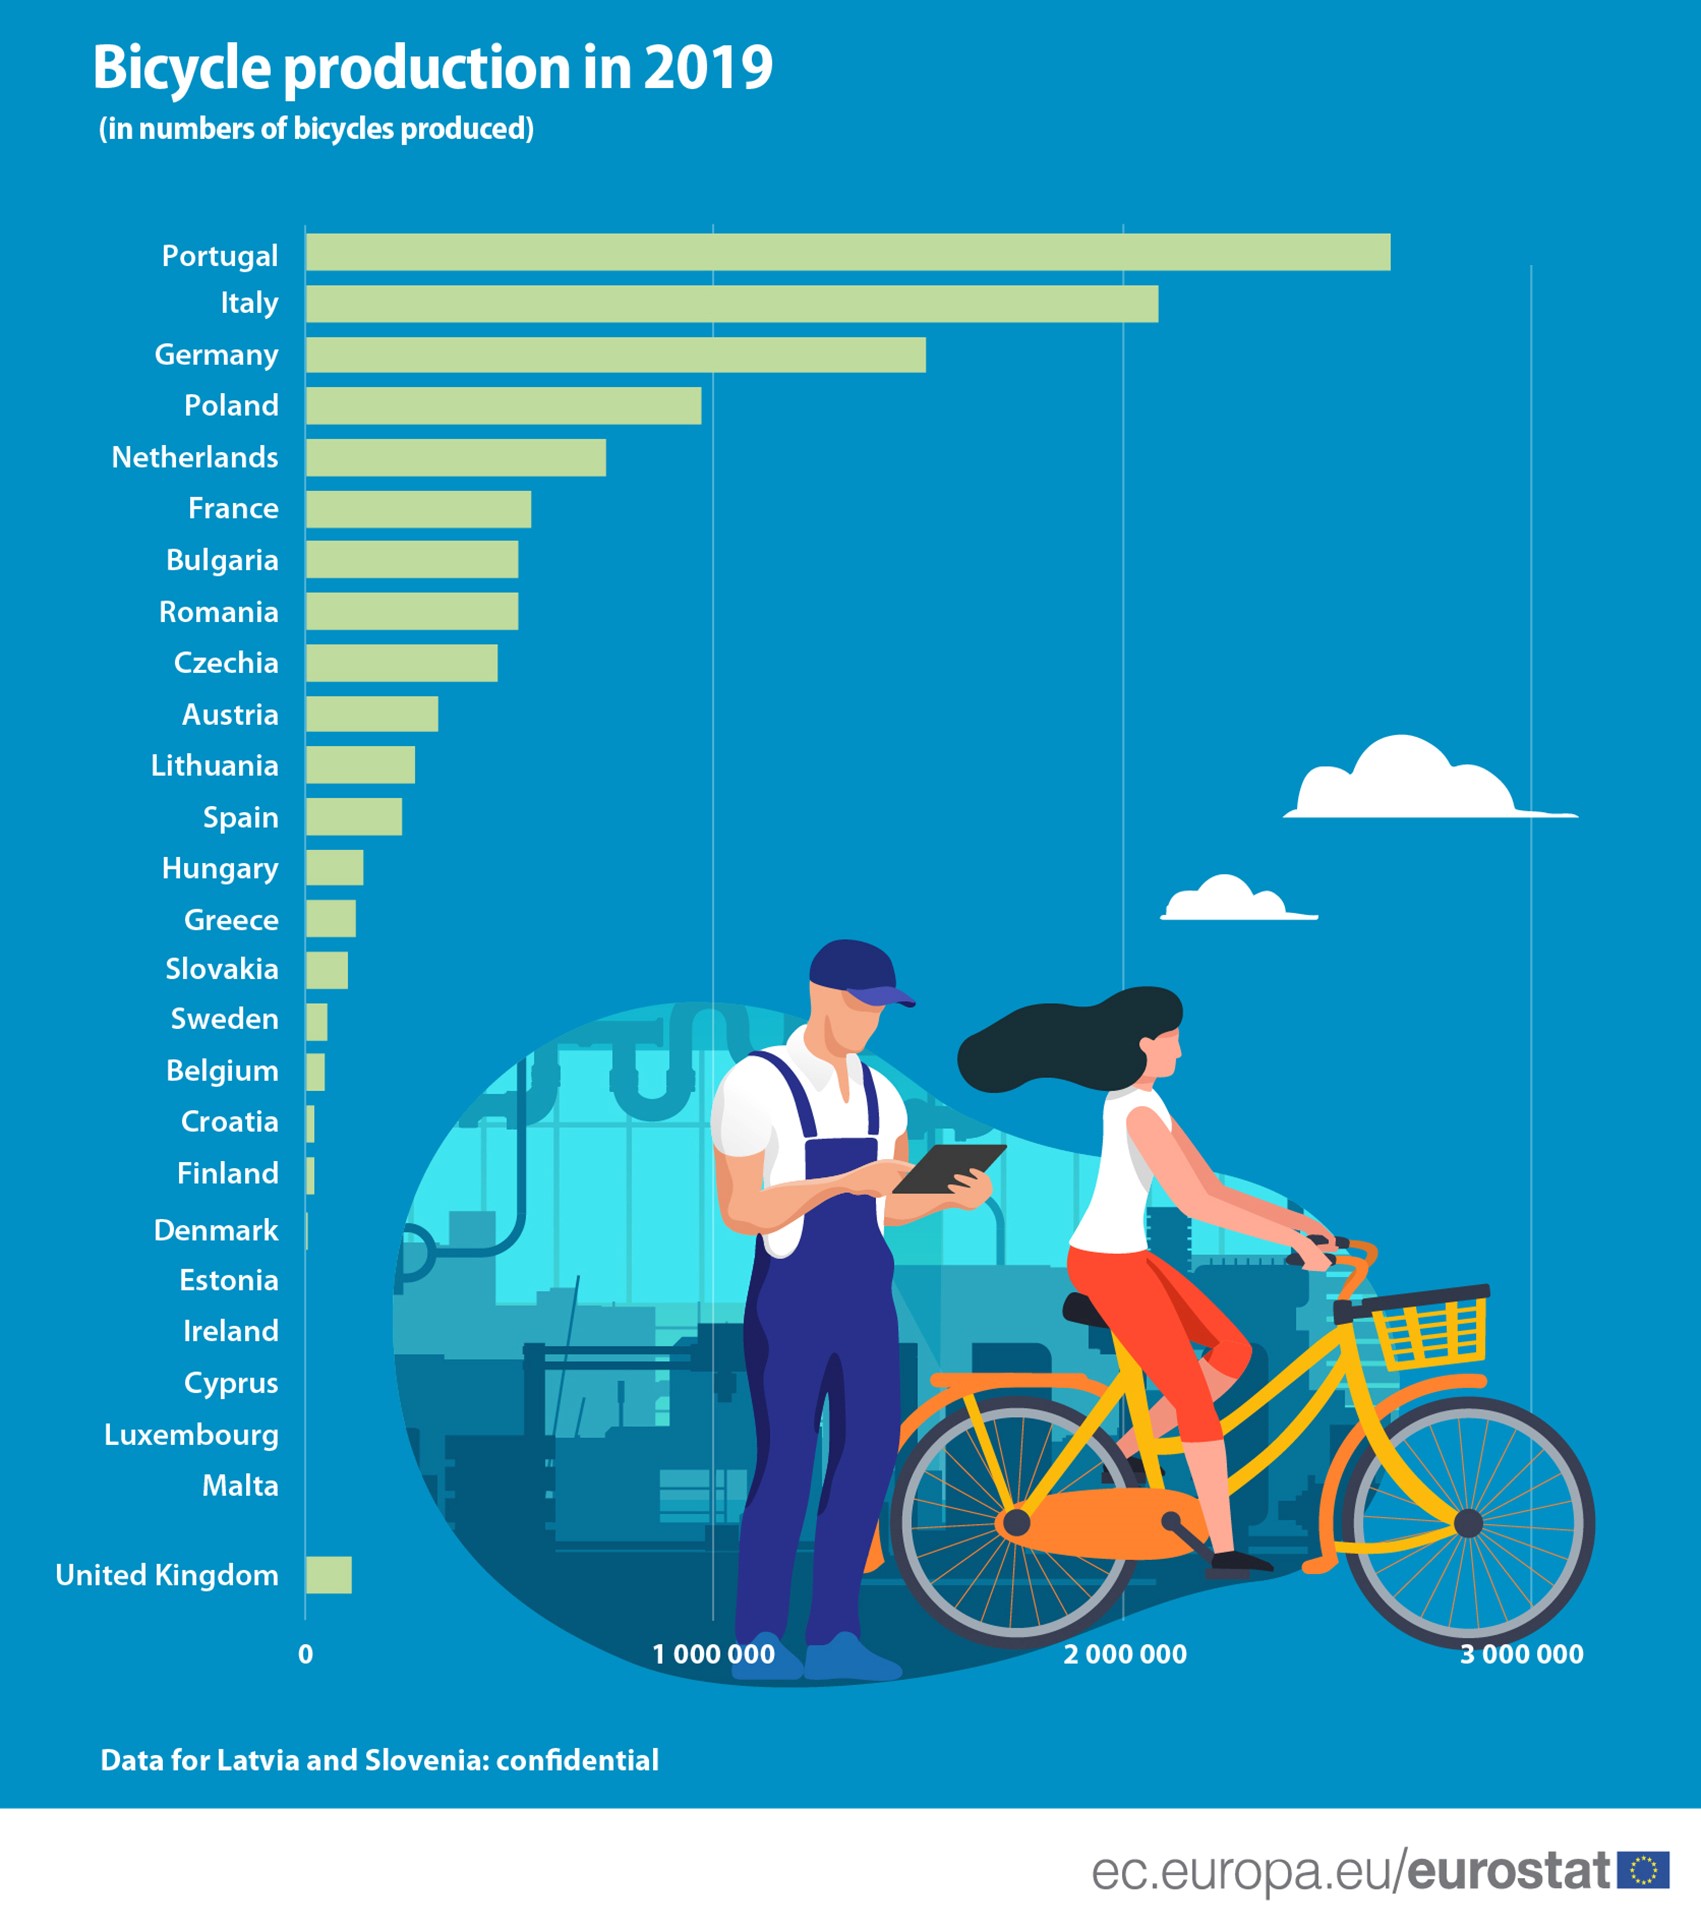  Production of bicycles in the EU 2019 